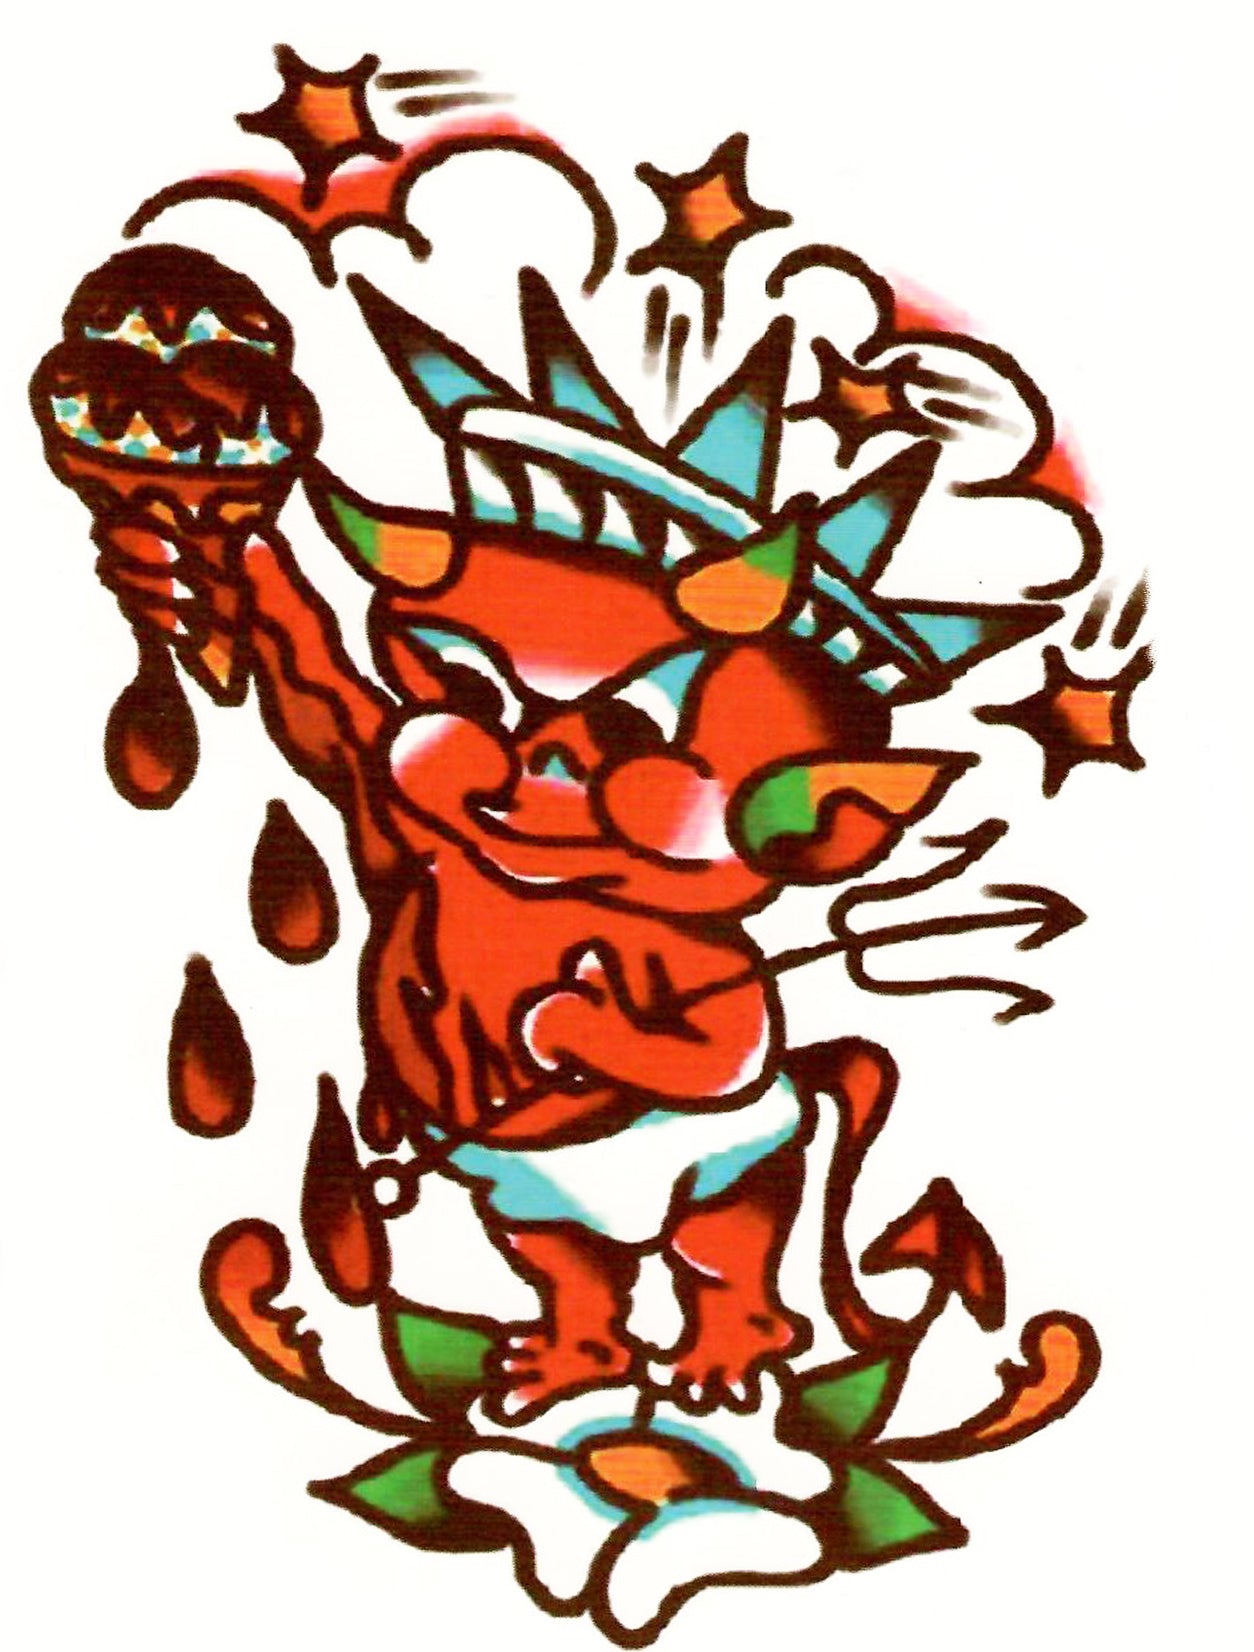 This hot stuff little devil first appeared in 1957 in a comic book before being inked on sailors. He is a red childlike devil in a cloth diaper who causes trouble. In this vintage tattoo replica, he is dripping ice cream all over. In vintage tattoos, classic colors of gold, green, red, orange, black, and blue.